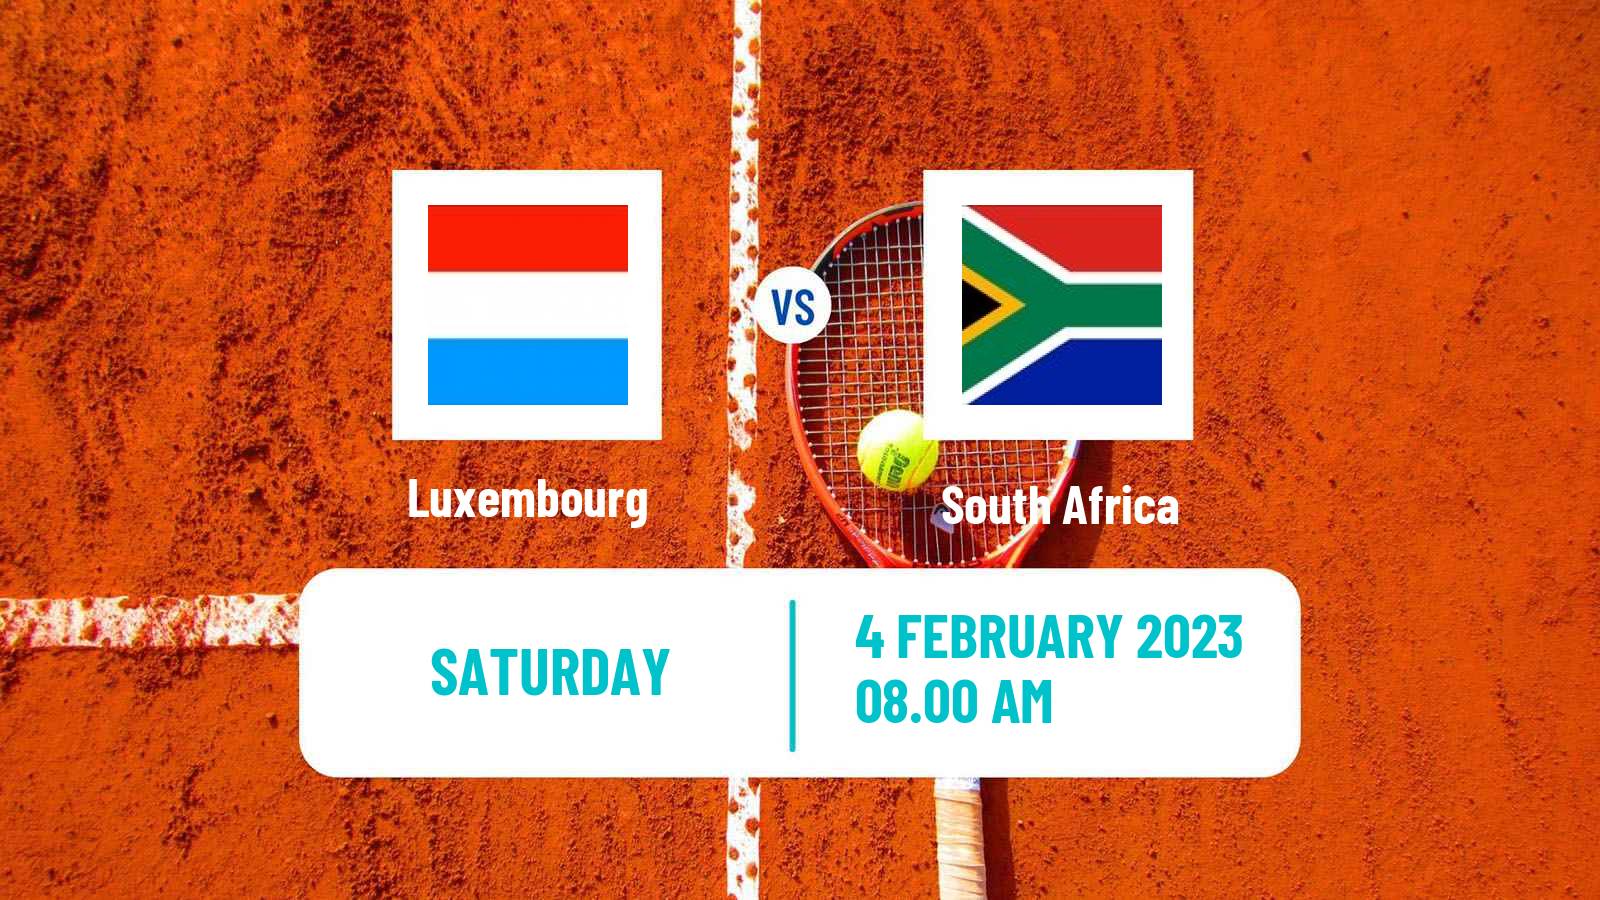 Tennis Davis Cup World Group II Teams Luxembourg - South Africa